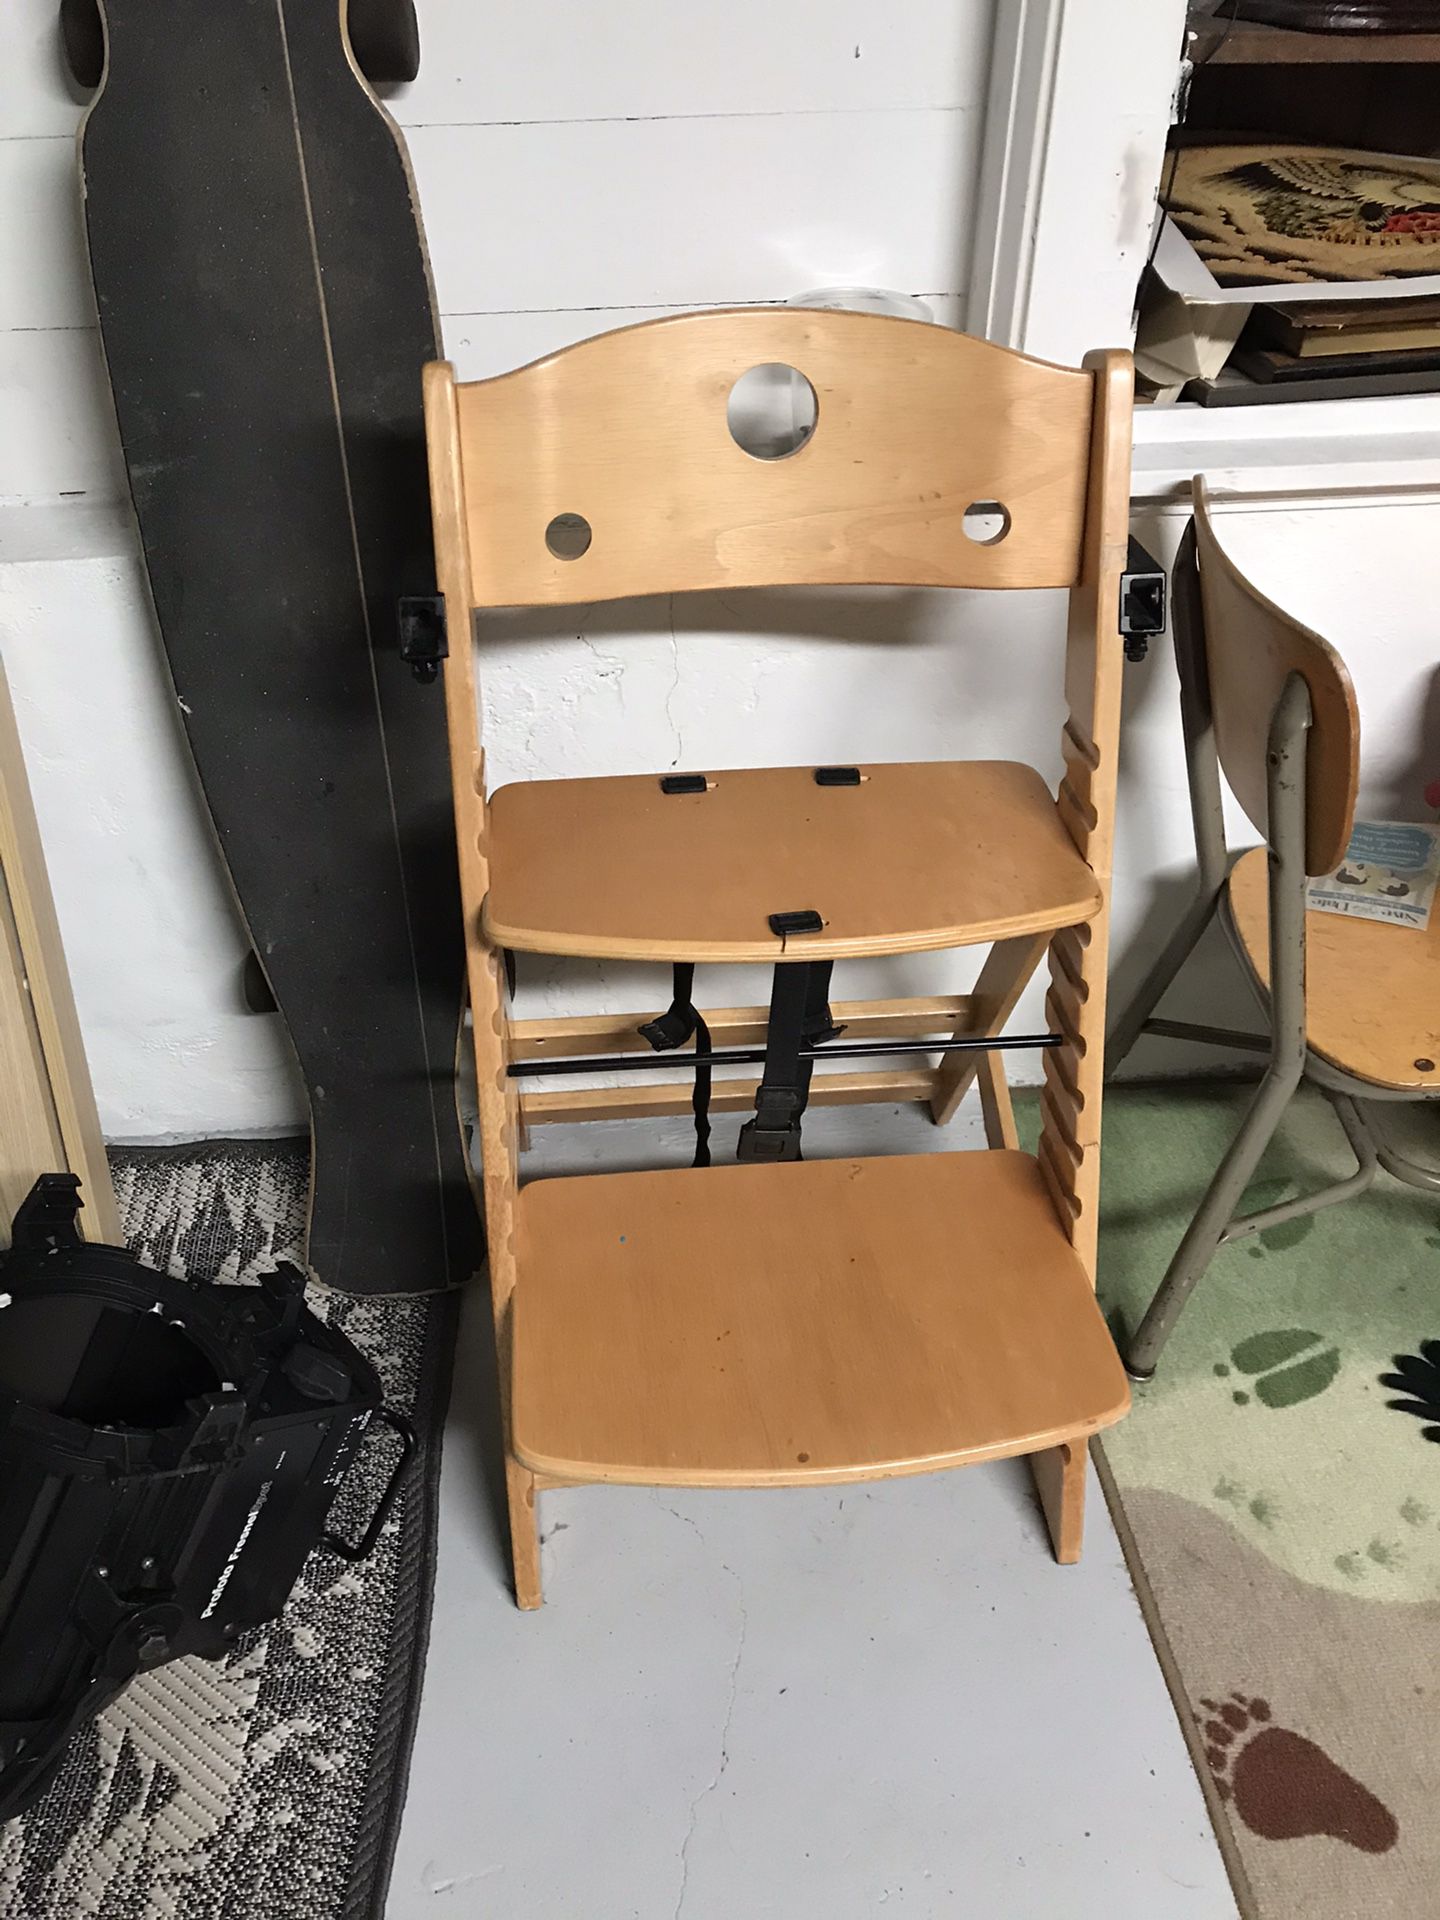 Special Tomato adjustable high chair for bigger kids